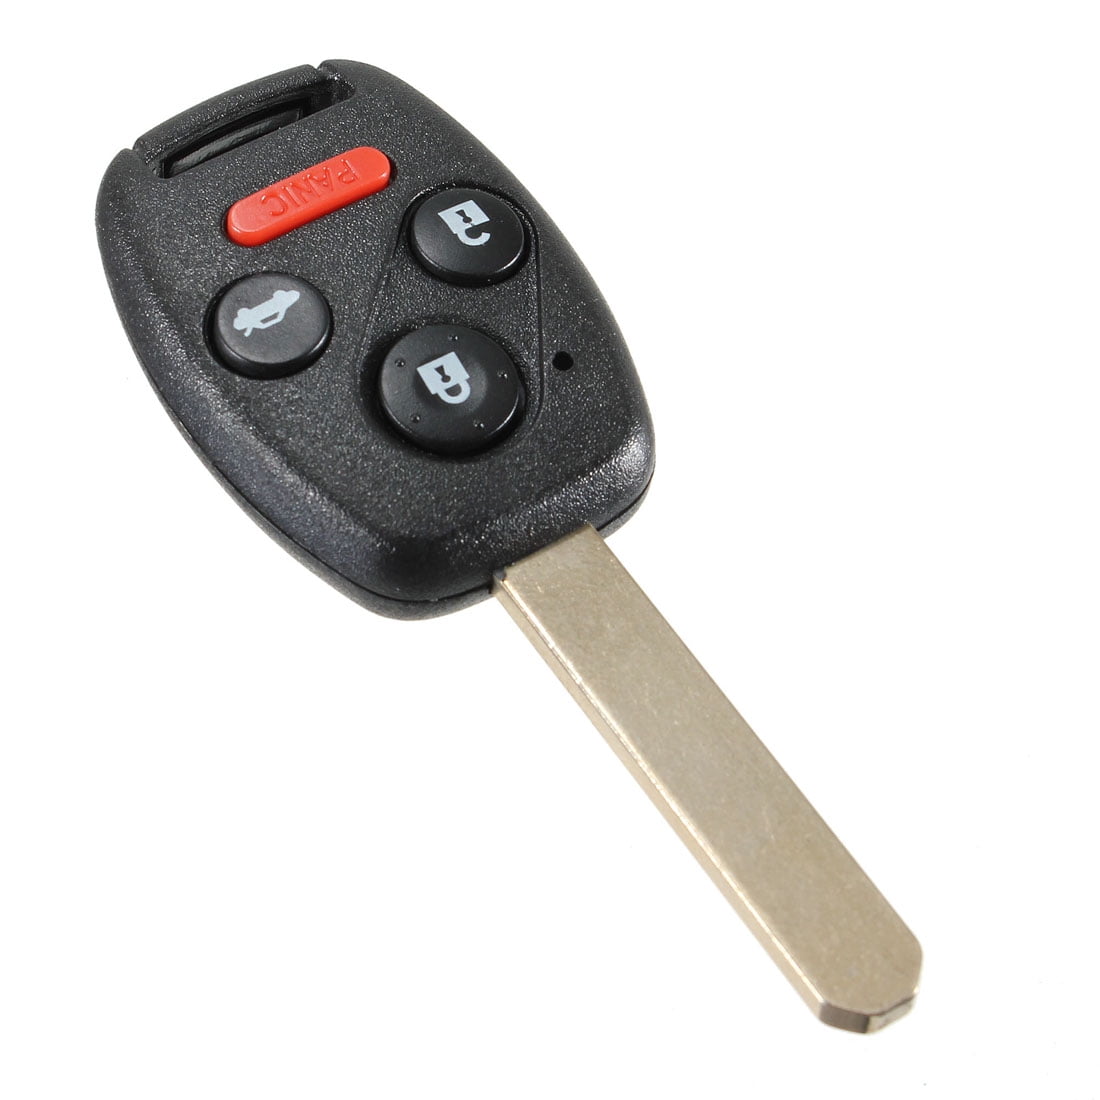 NEW 4 Buttons CASE & BUTTON for TOYOTA Keyless Entry Remote & Uncut Key Insert 